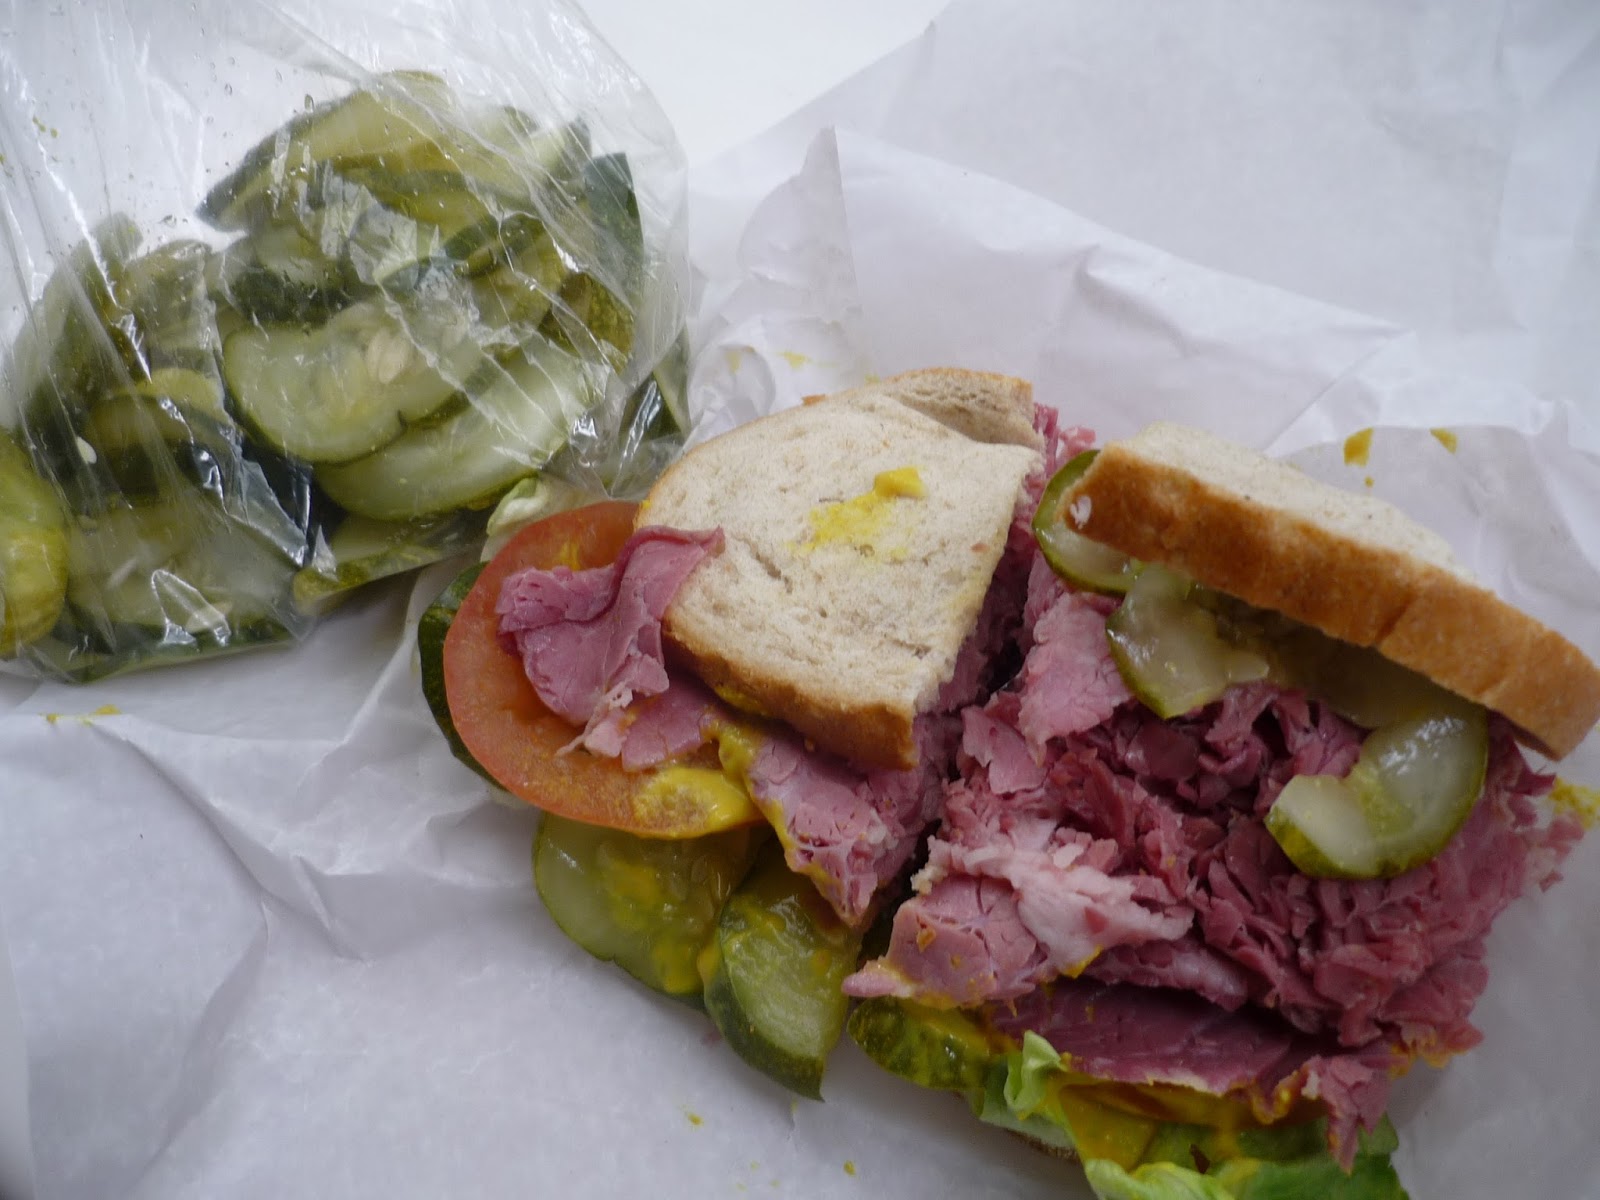 Moon's Sandwich Shop celebrating 90 years in Chicago - Chicago Sun-Times